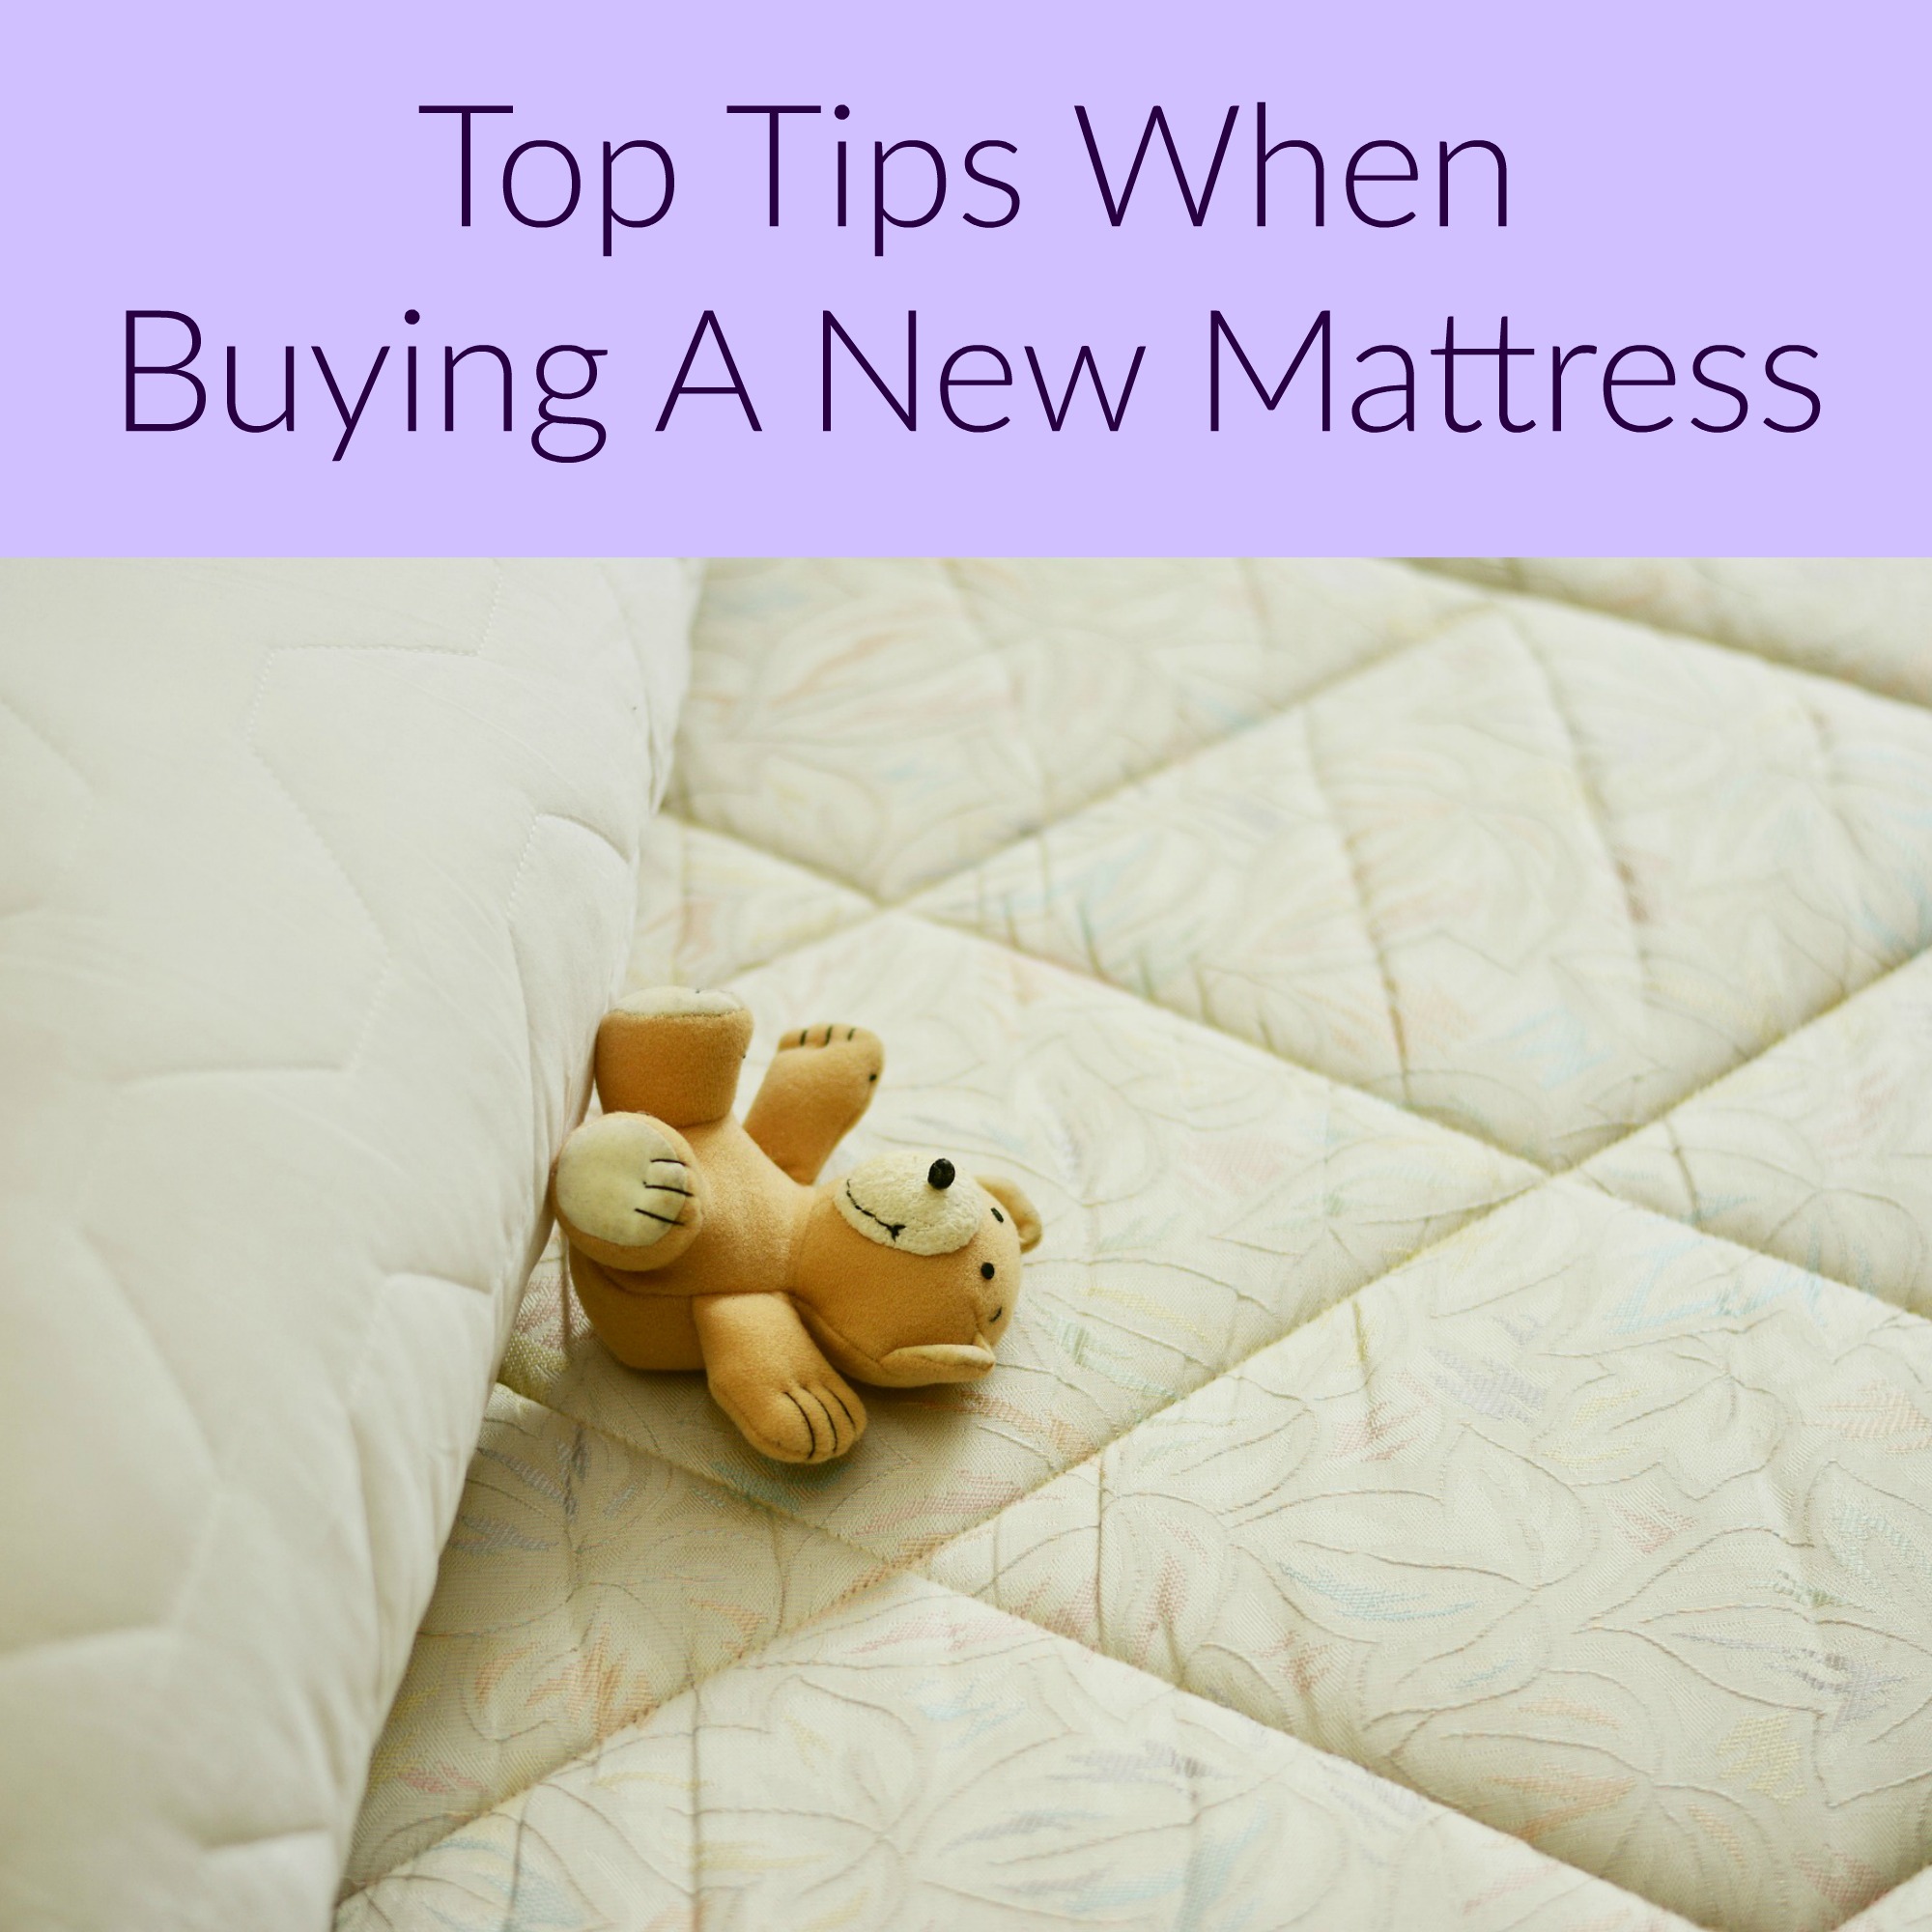 Top Tips When Buying A New Mattress